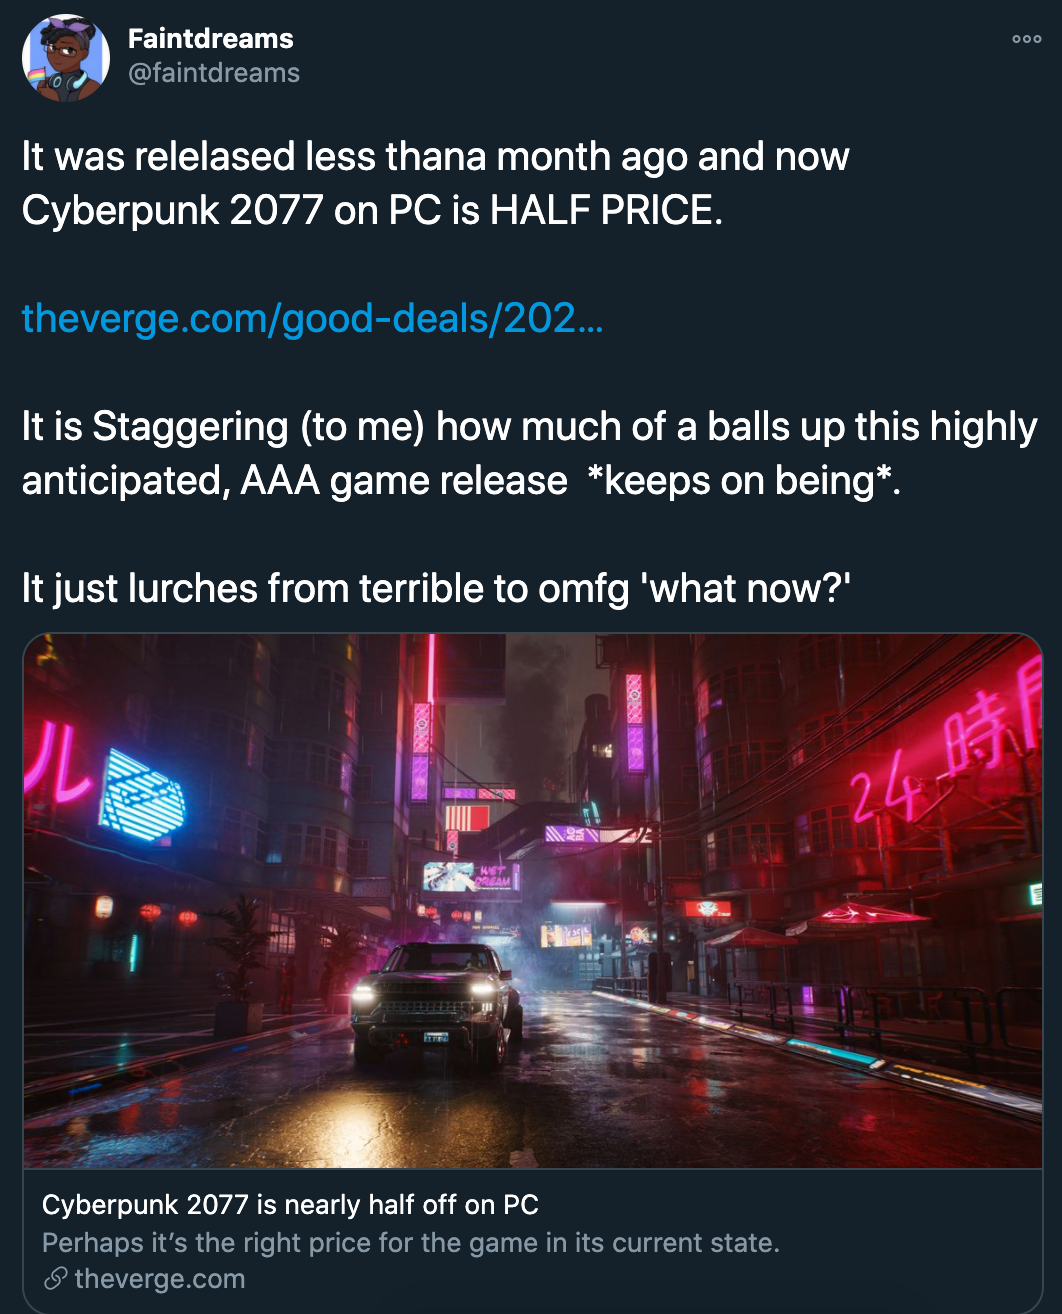 cyberpunk news - It was relelased less than a month ago and now Cyberpunk 2077 on Pc is Half Price. It is Staggering to me how much of a balls up this highly anticipated, Aaa game release keeps on being It just